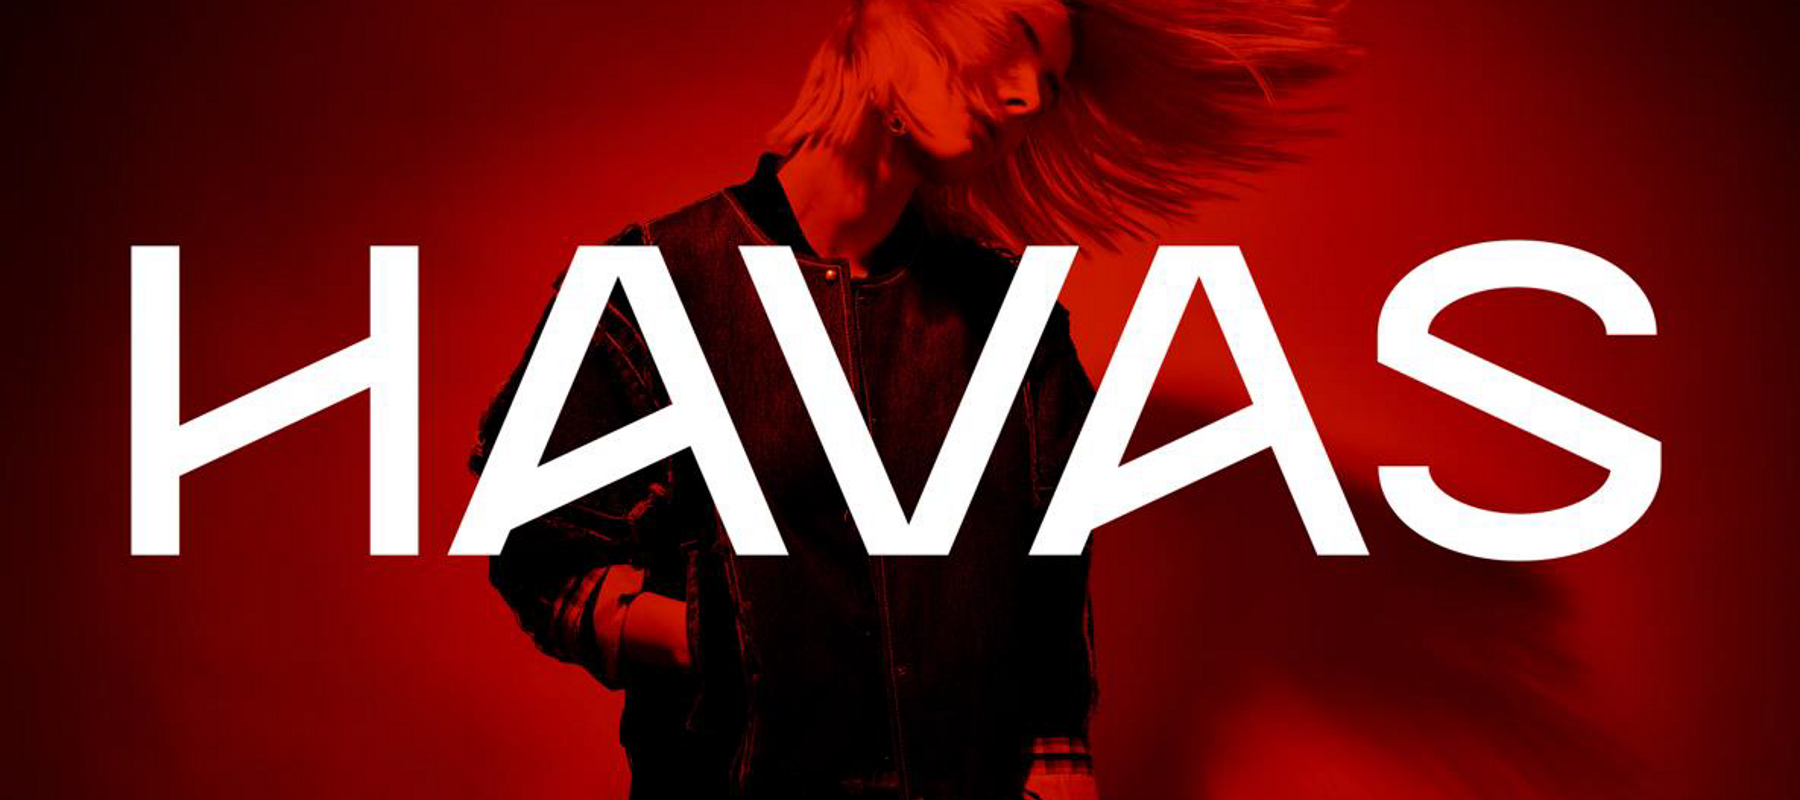 Havas reveals a new brand architecture and visual identity